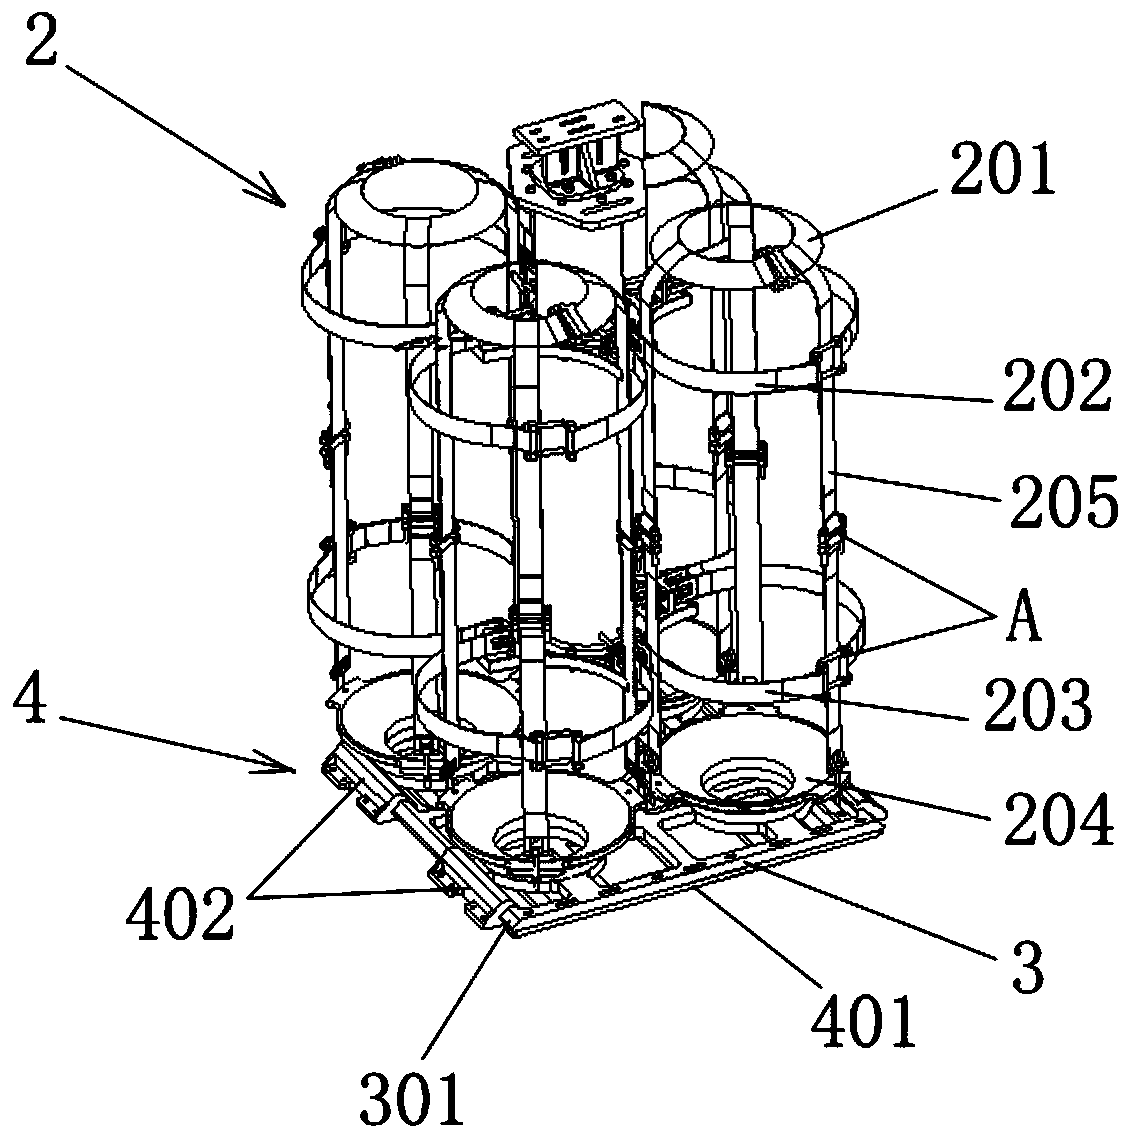 High-pressure gas cylinder carrying device for spacecraft